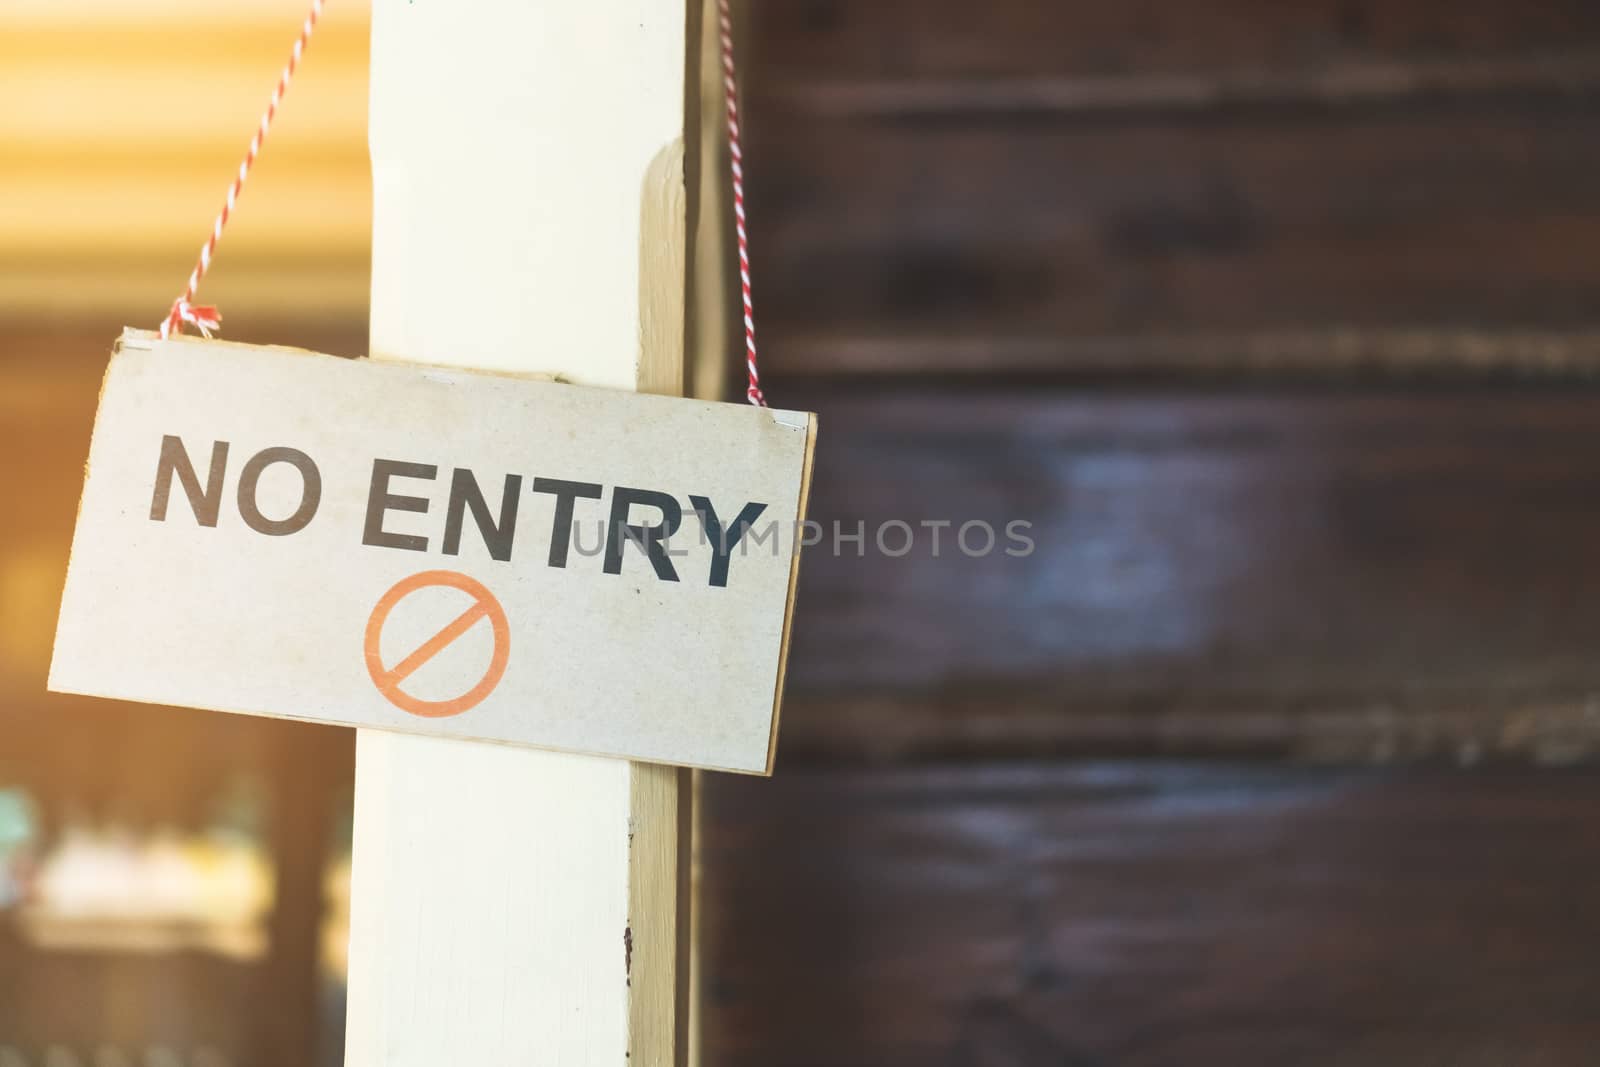 No entry sigh hanging on stair. by Suwant